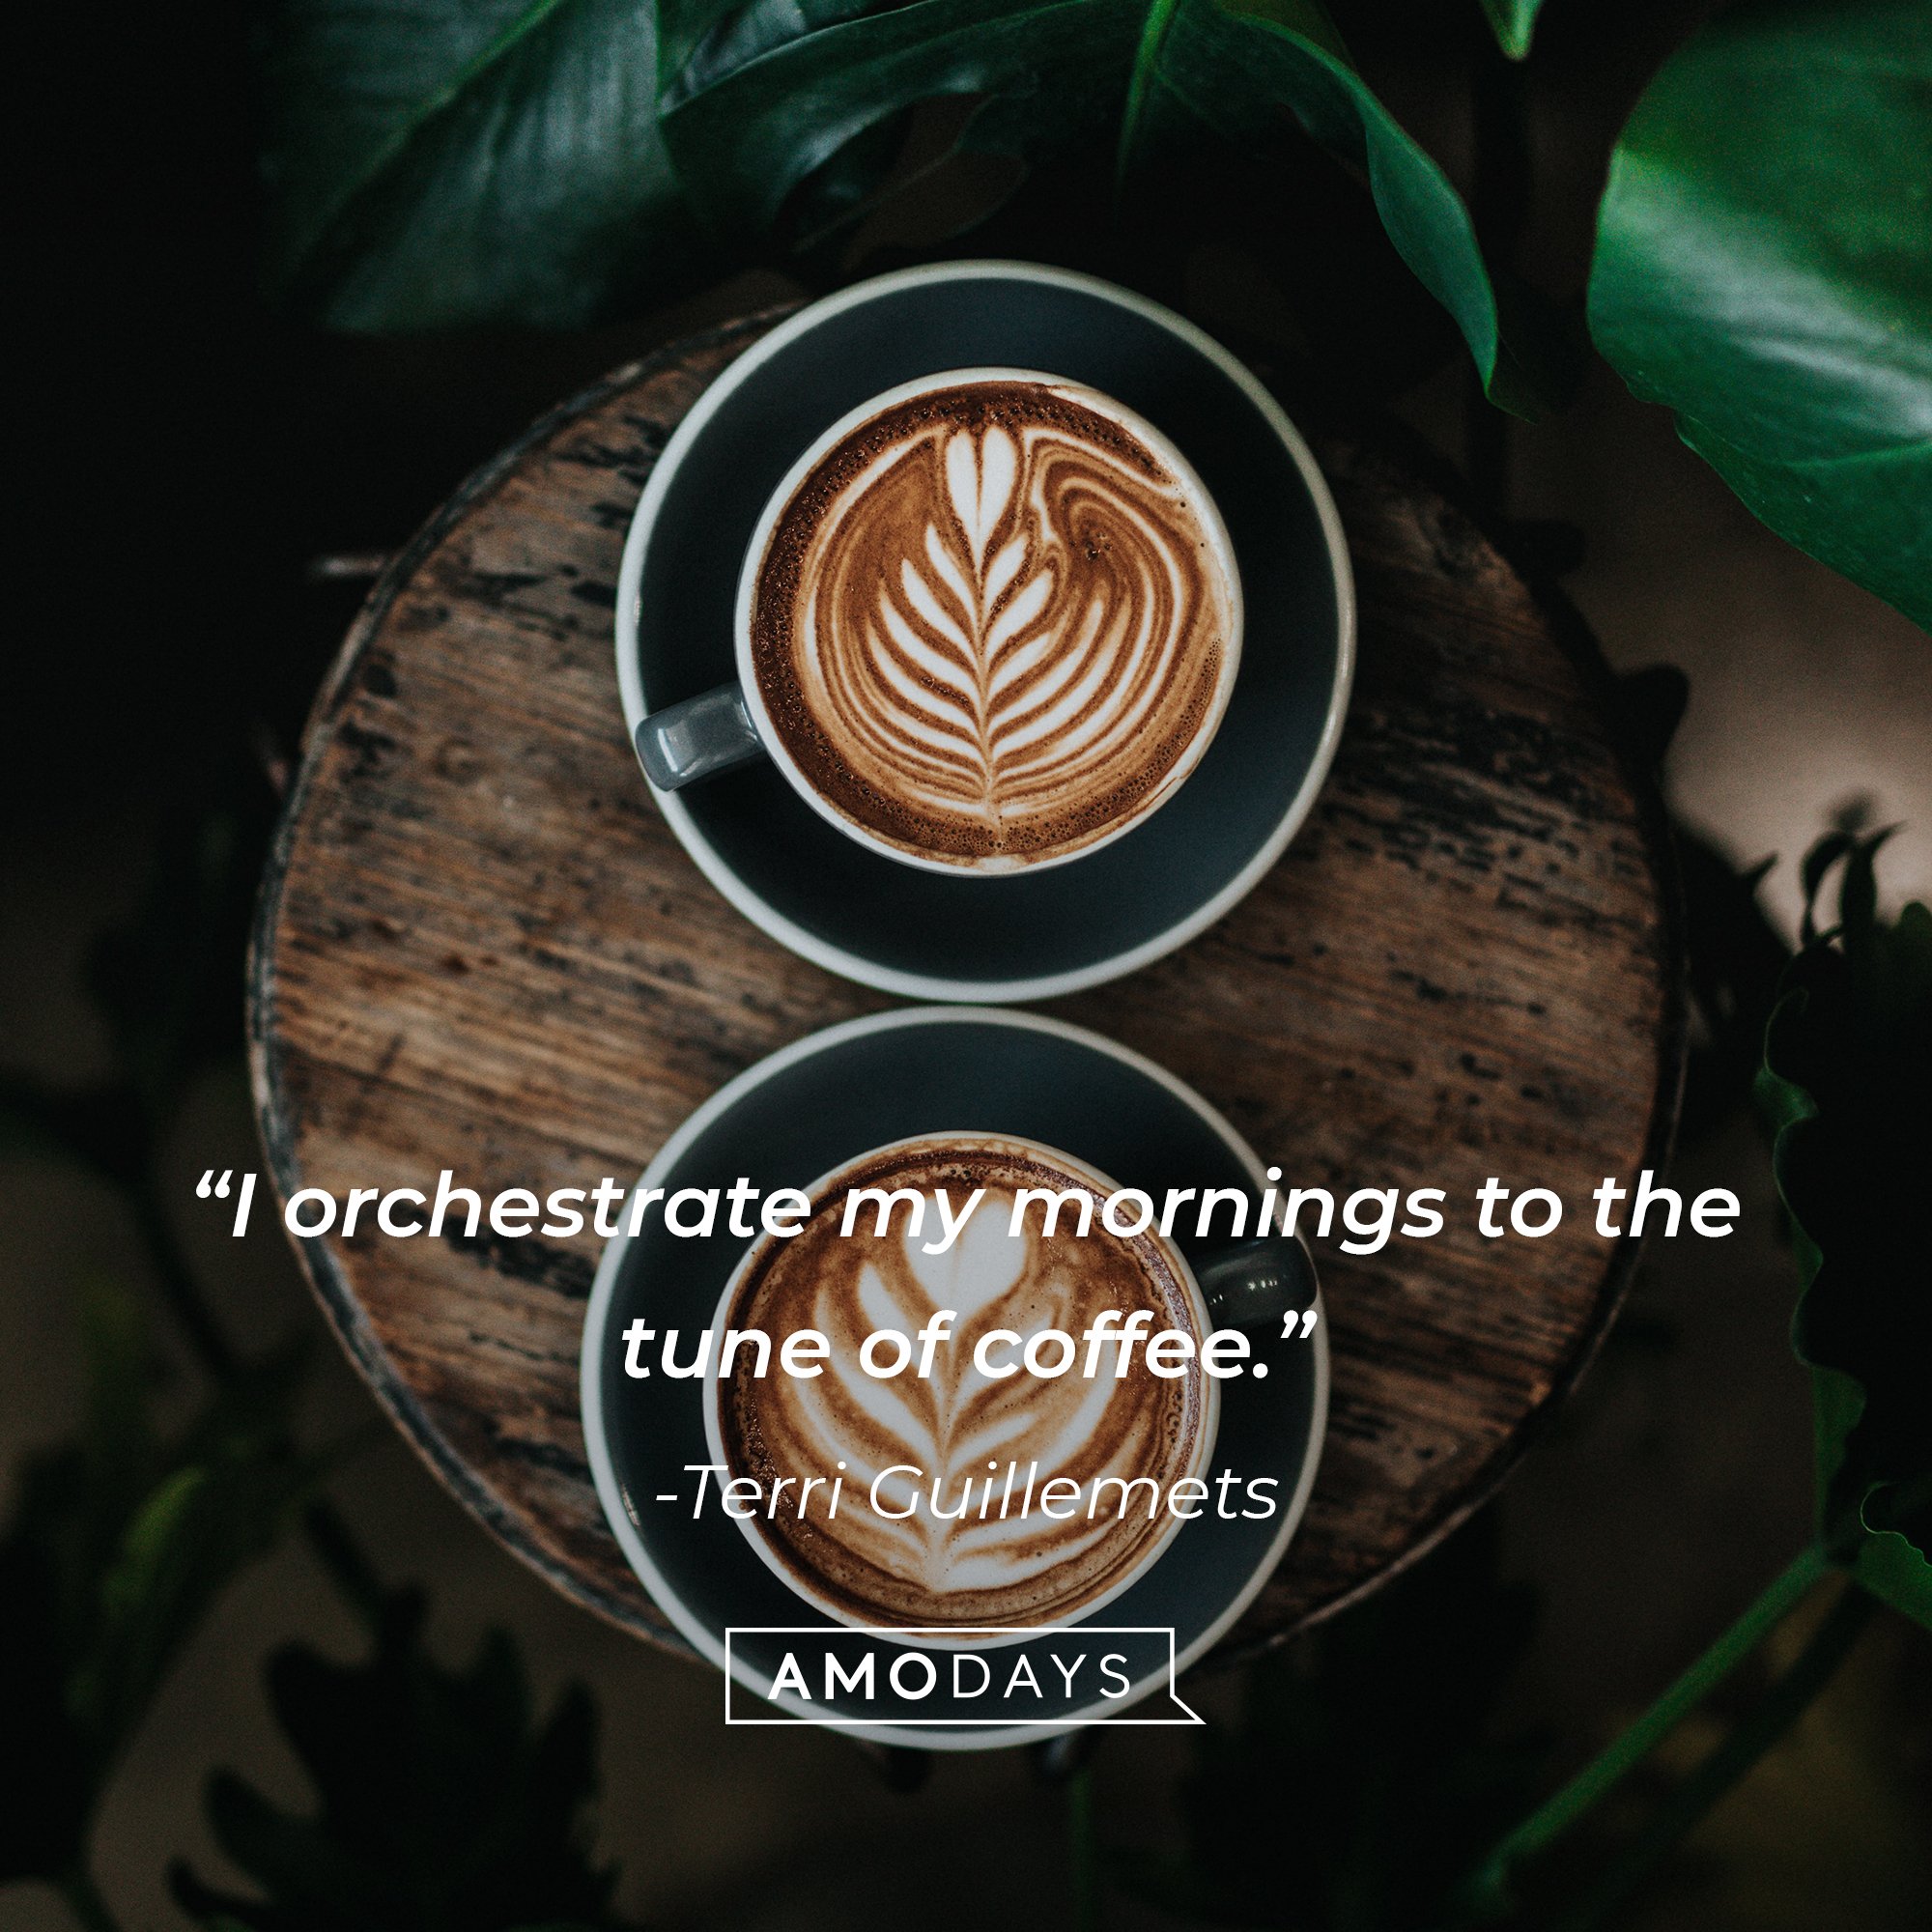 Terri Guillemets' quote: "I orchestrate my mornings to the tune of coffee." | Image: AmoDays